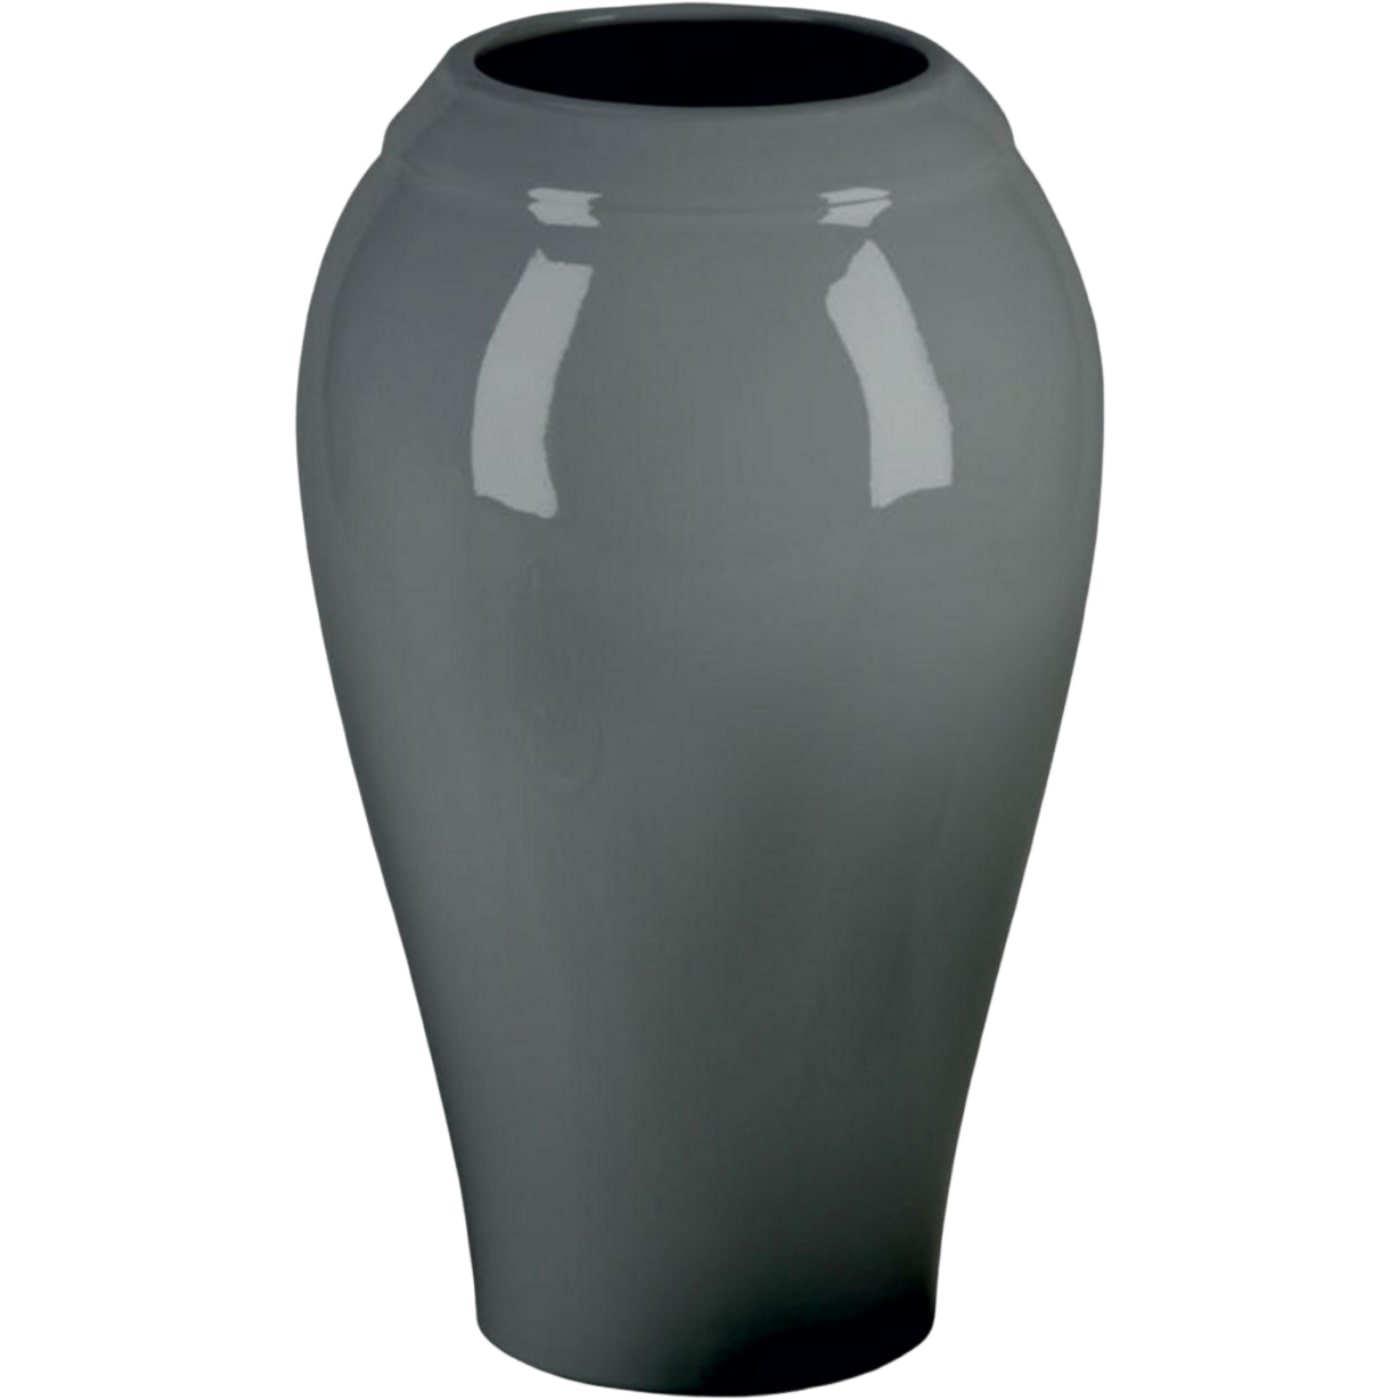 Grave vase Liscia gray 21x13cm - 8.3x5.1in In gray porcelain, wall attached LI144P/G